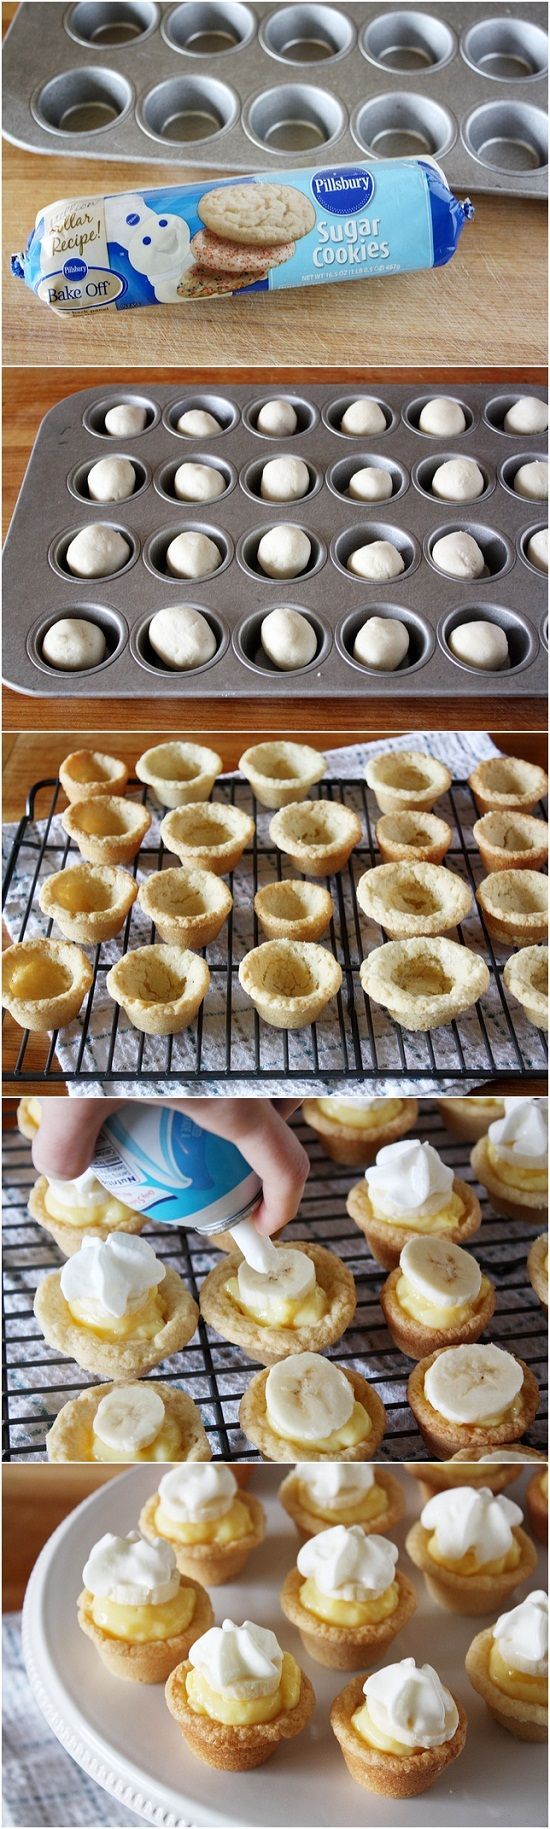 Easy peesy – mini banana cream pies. (Could even buy the mini tart shells instead of the cookie dough)